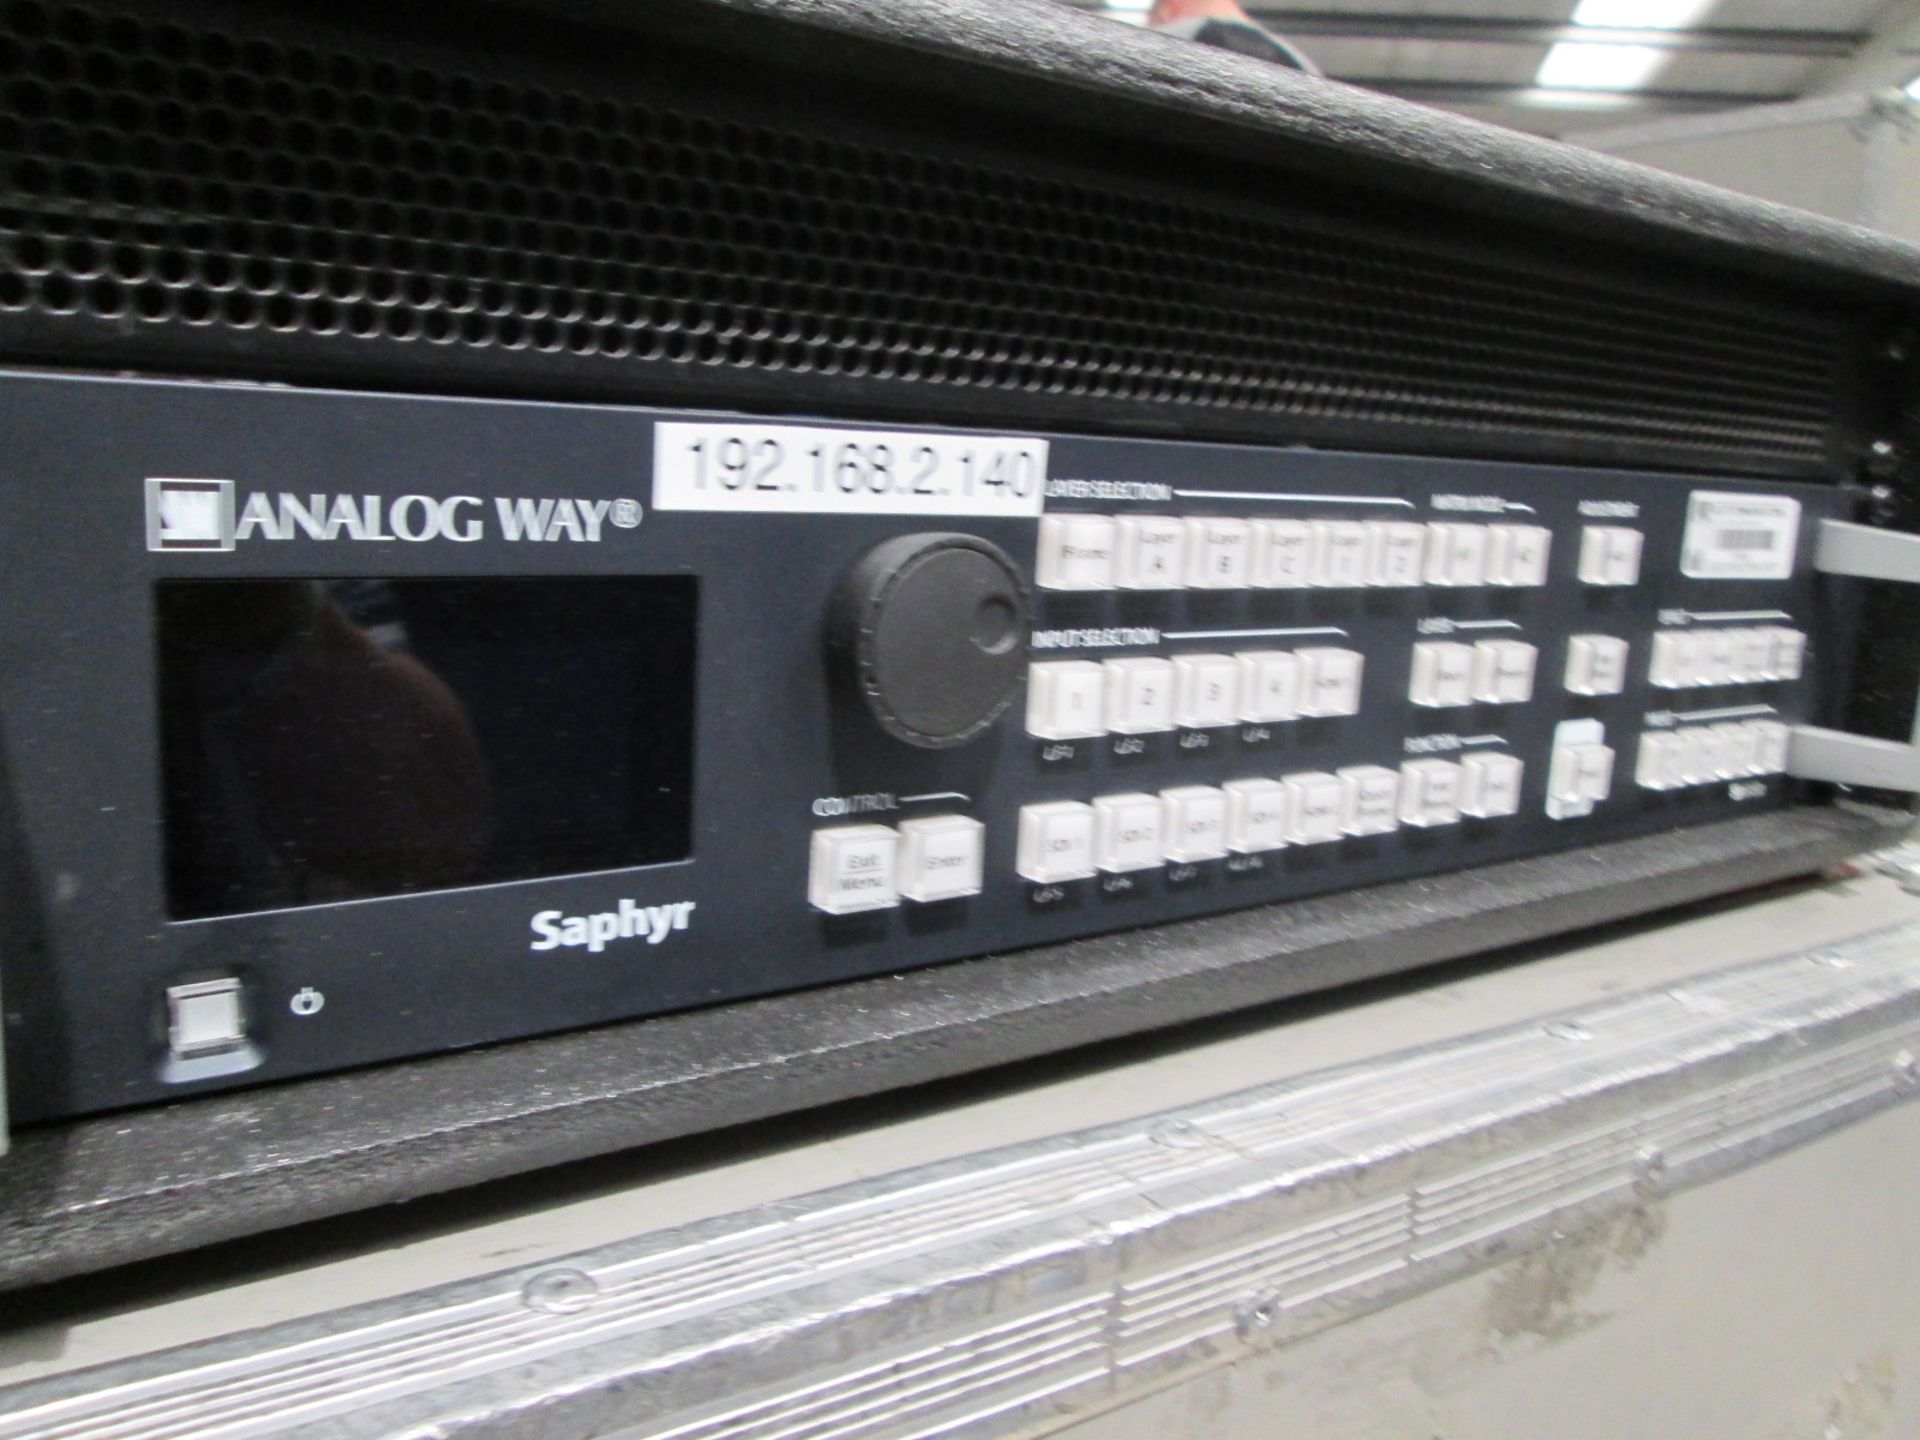 Analog Way Saphyr SPX450 Switcher with 2 x Dell 24" monitors and Netgear 24 port gigabit switch. - Image 2 of 10